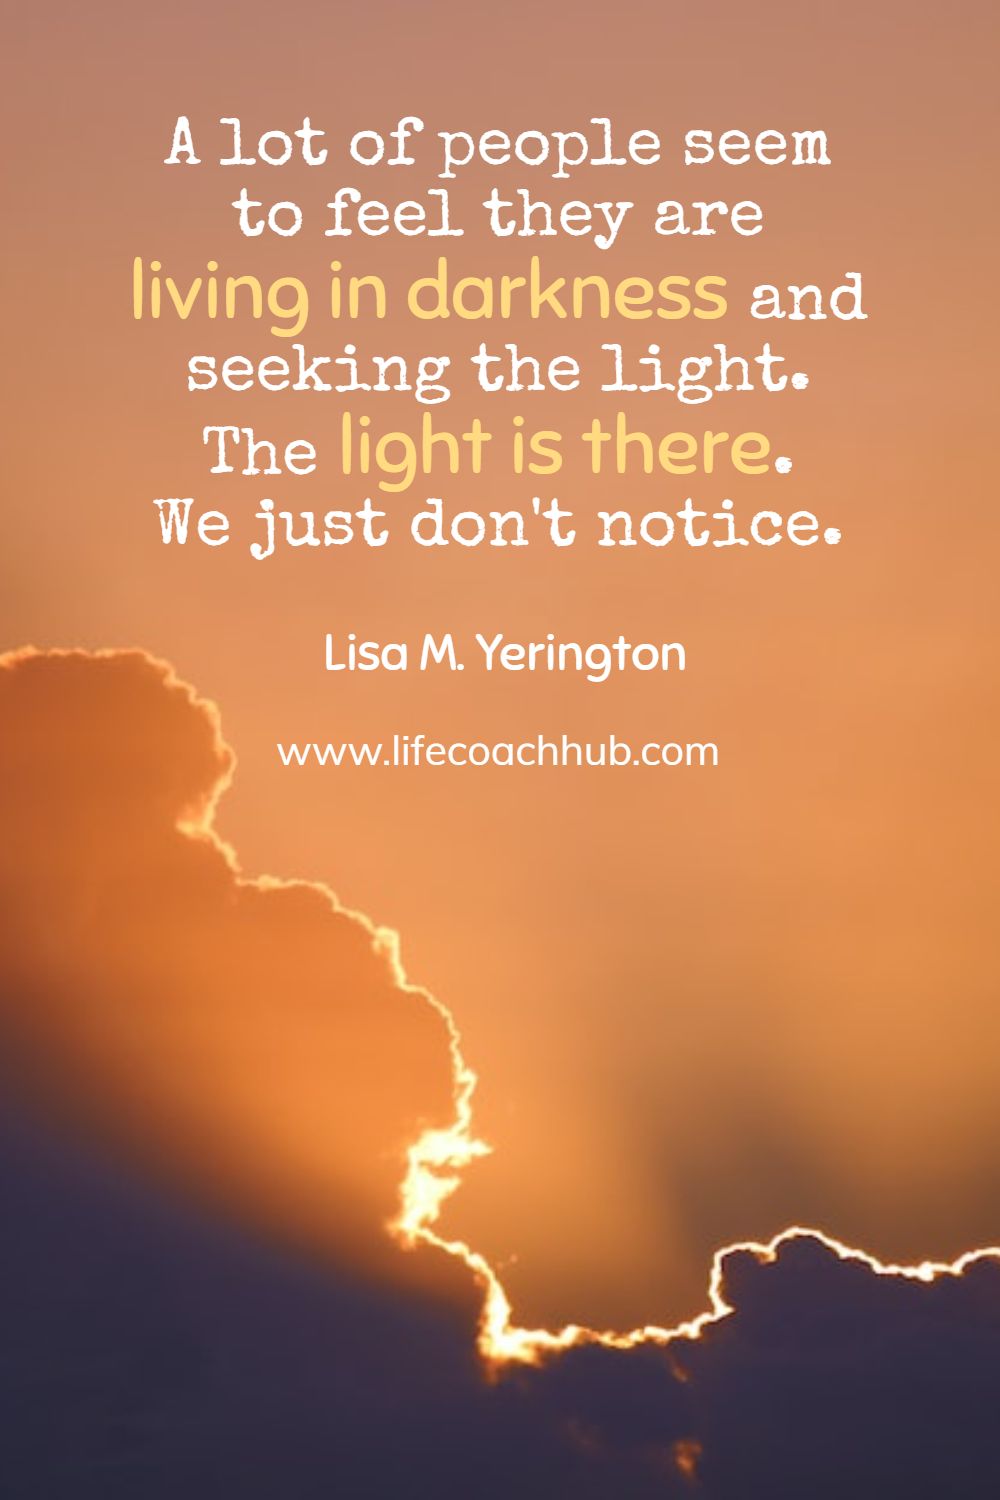 A lot of people seem to feel they are living in darkness and seek the light. The light is there. We just don't notice. Lisa M. Yerington Coaching Quote